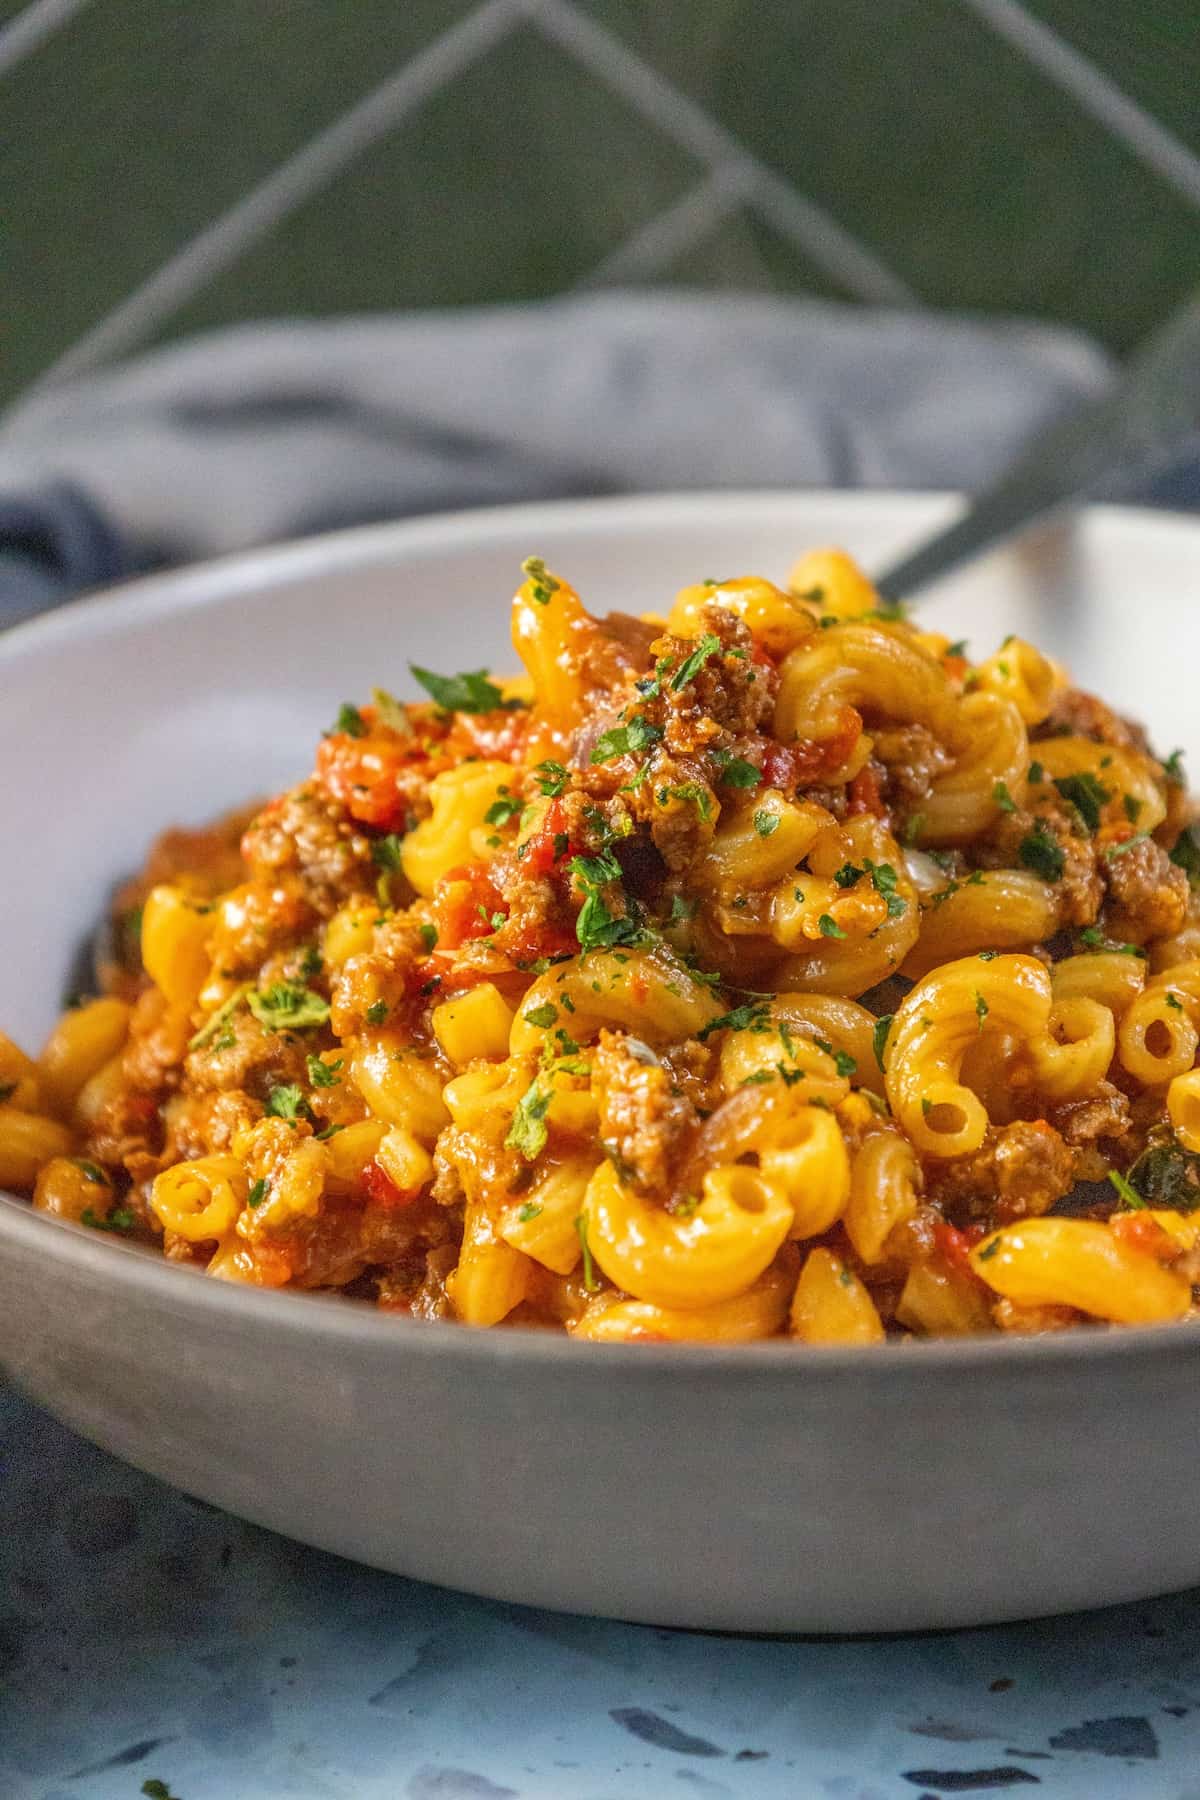 A flavorful American recipe featuring a hearty bowl of Goulash, a delicious combination of pasta, meat, and sauce.